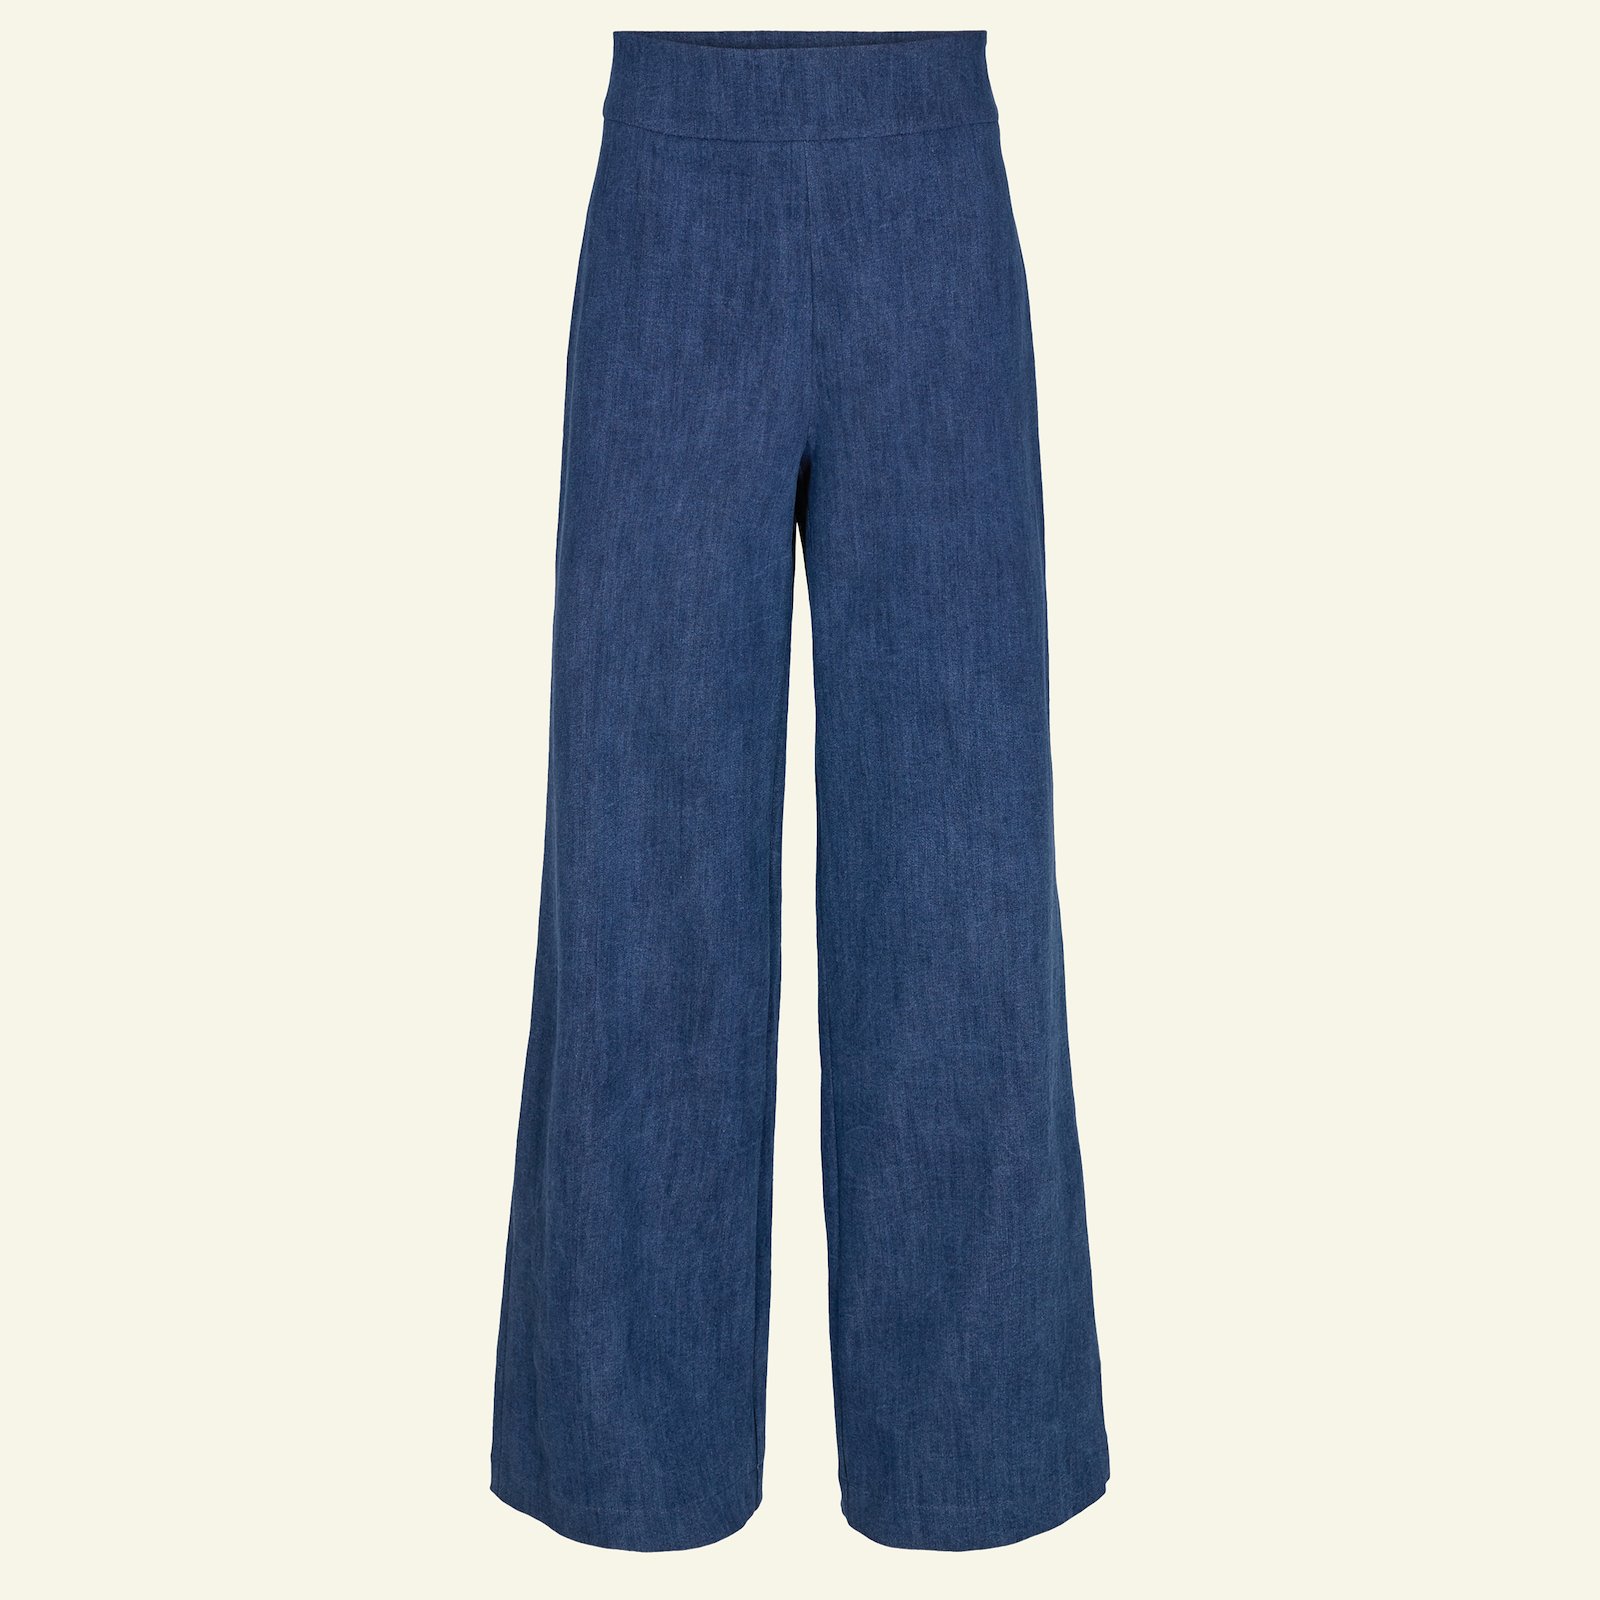 Highwaist and wide legs trousers, 42/14 p20052_460851_sskit